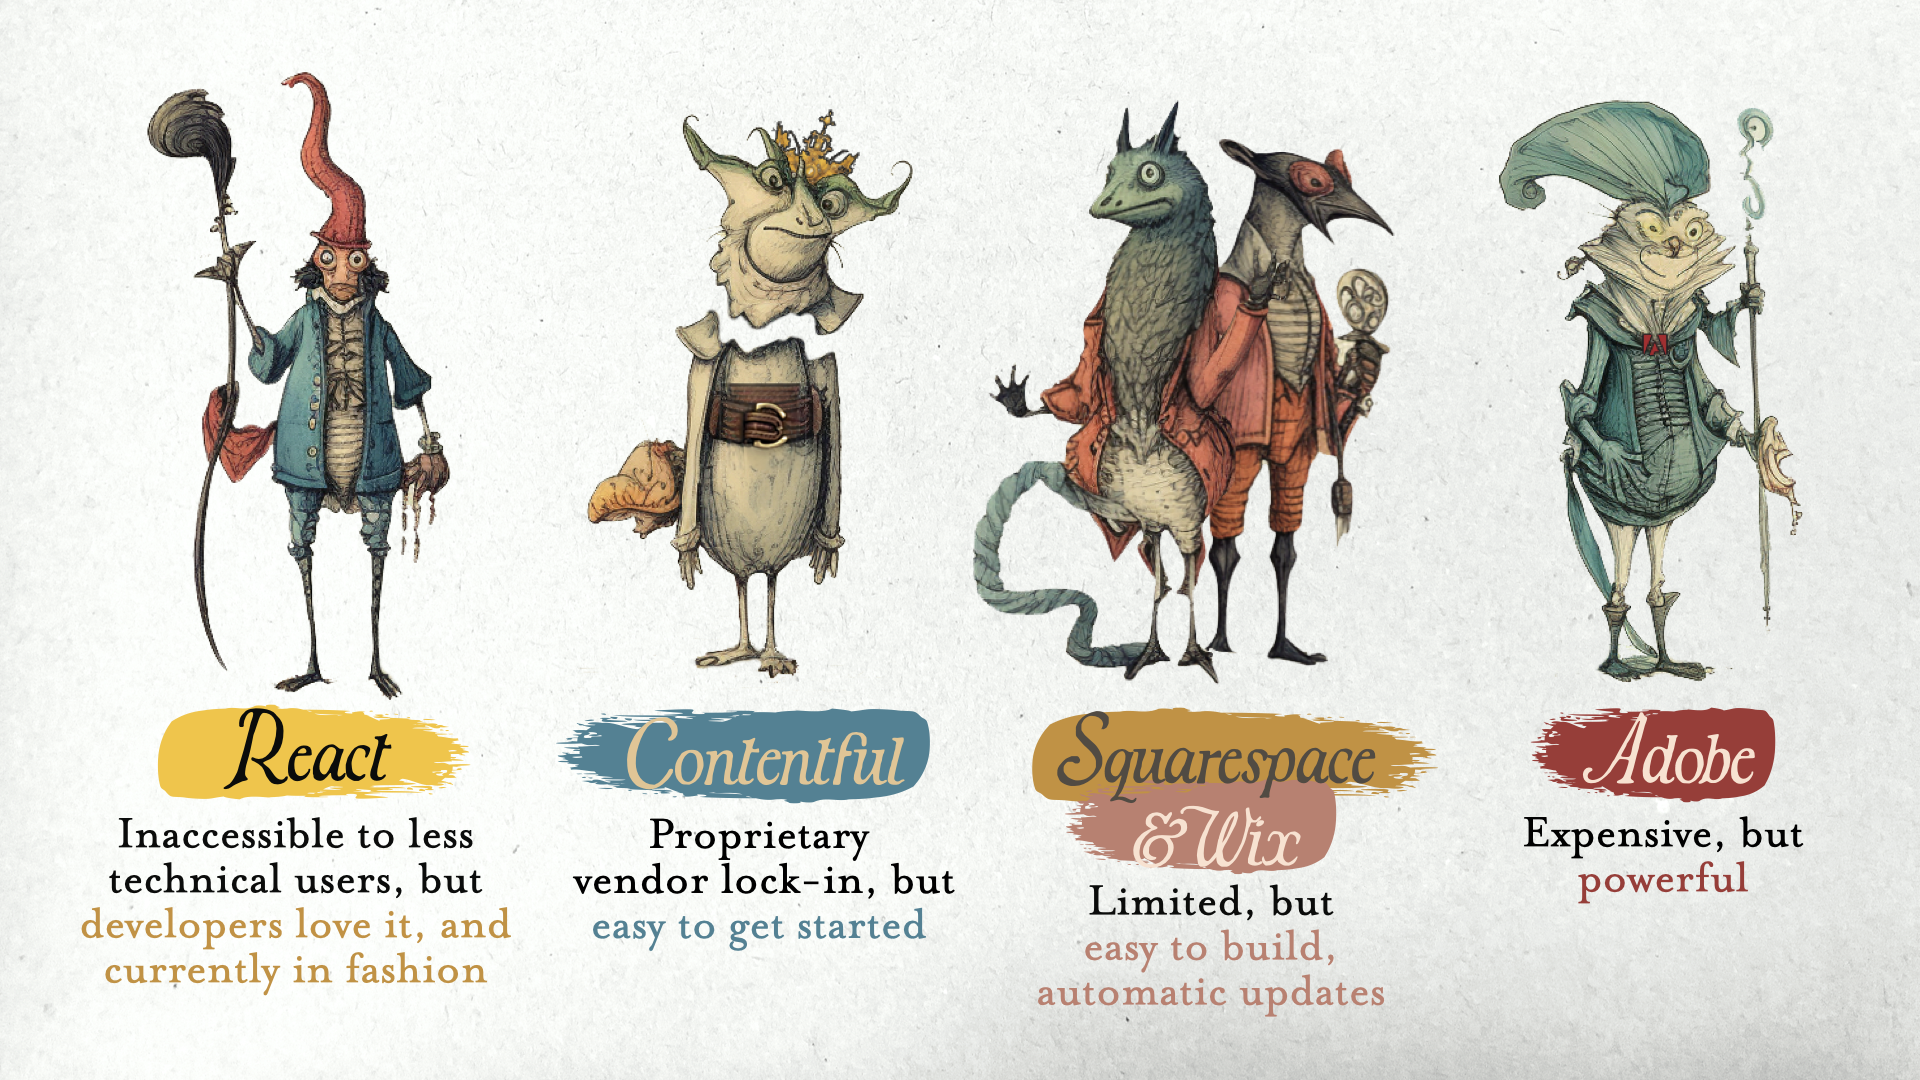 Four illustrated characters, each representing a website building platform: "React" is a tall figure with a fashionable hat, described as great for developers but not for marketers; "Contentful" is a character with a floating head, known for being easy to begin with but suffering vendor lock-in issues; "Squarespace & Wix" are reptile-like figures, marked as limited but easy to use and auto-updated; and "Adobe" is a character with a posh outfit, labeled as expensive but powerful.